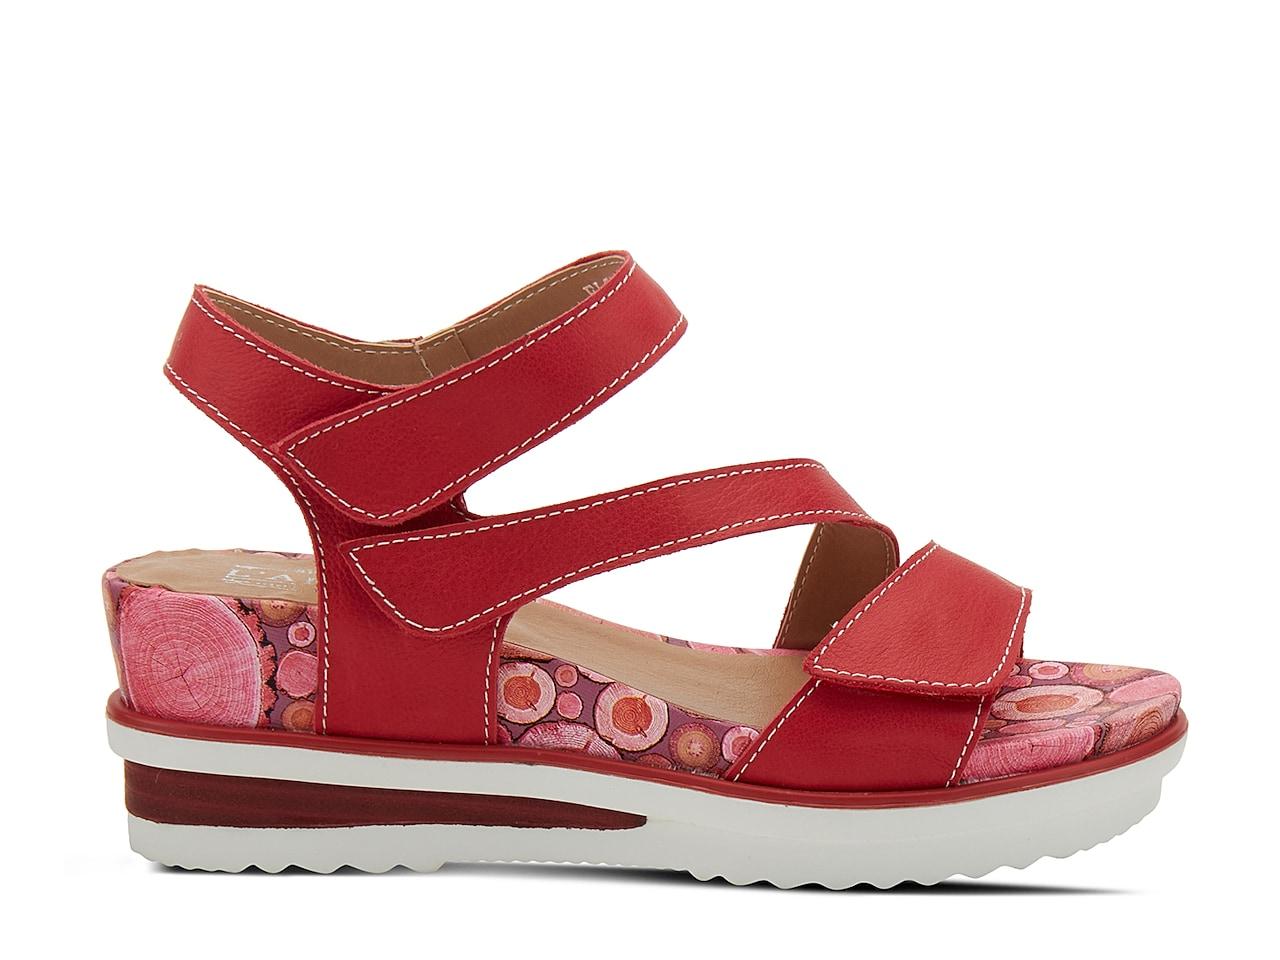 Spring Step Leather Elona Wedge Sandal in Red - Lyst